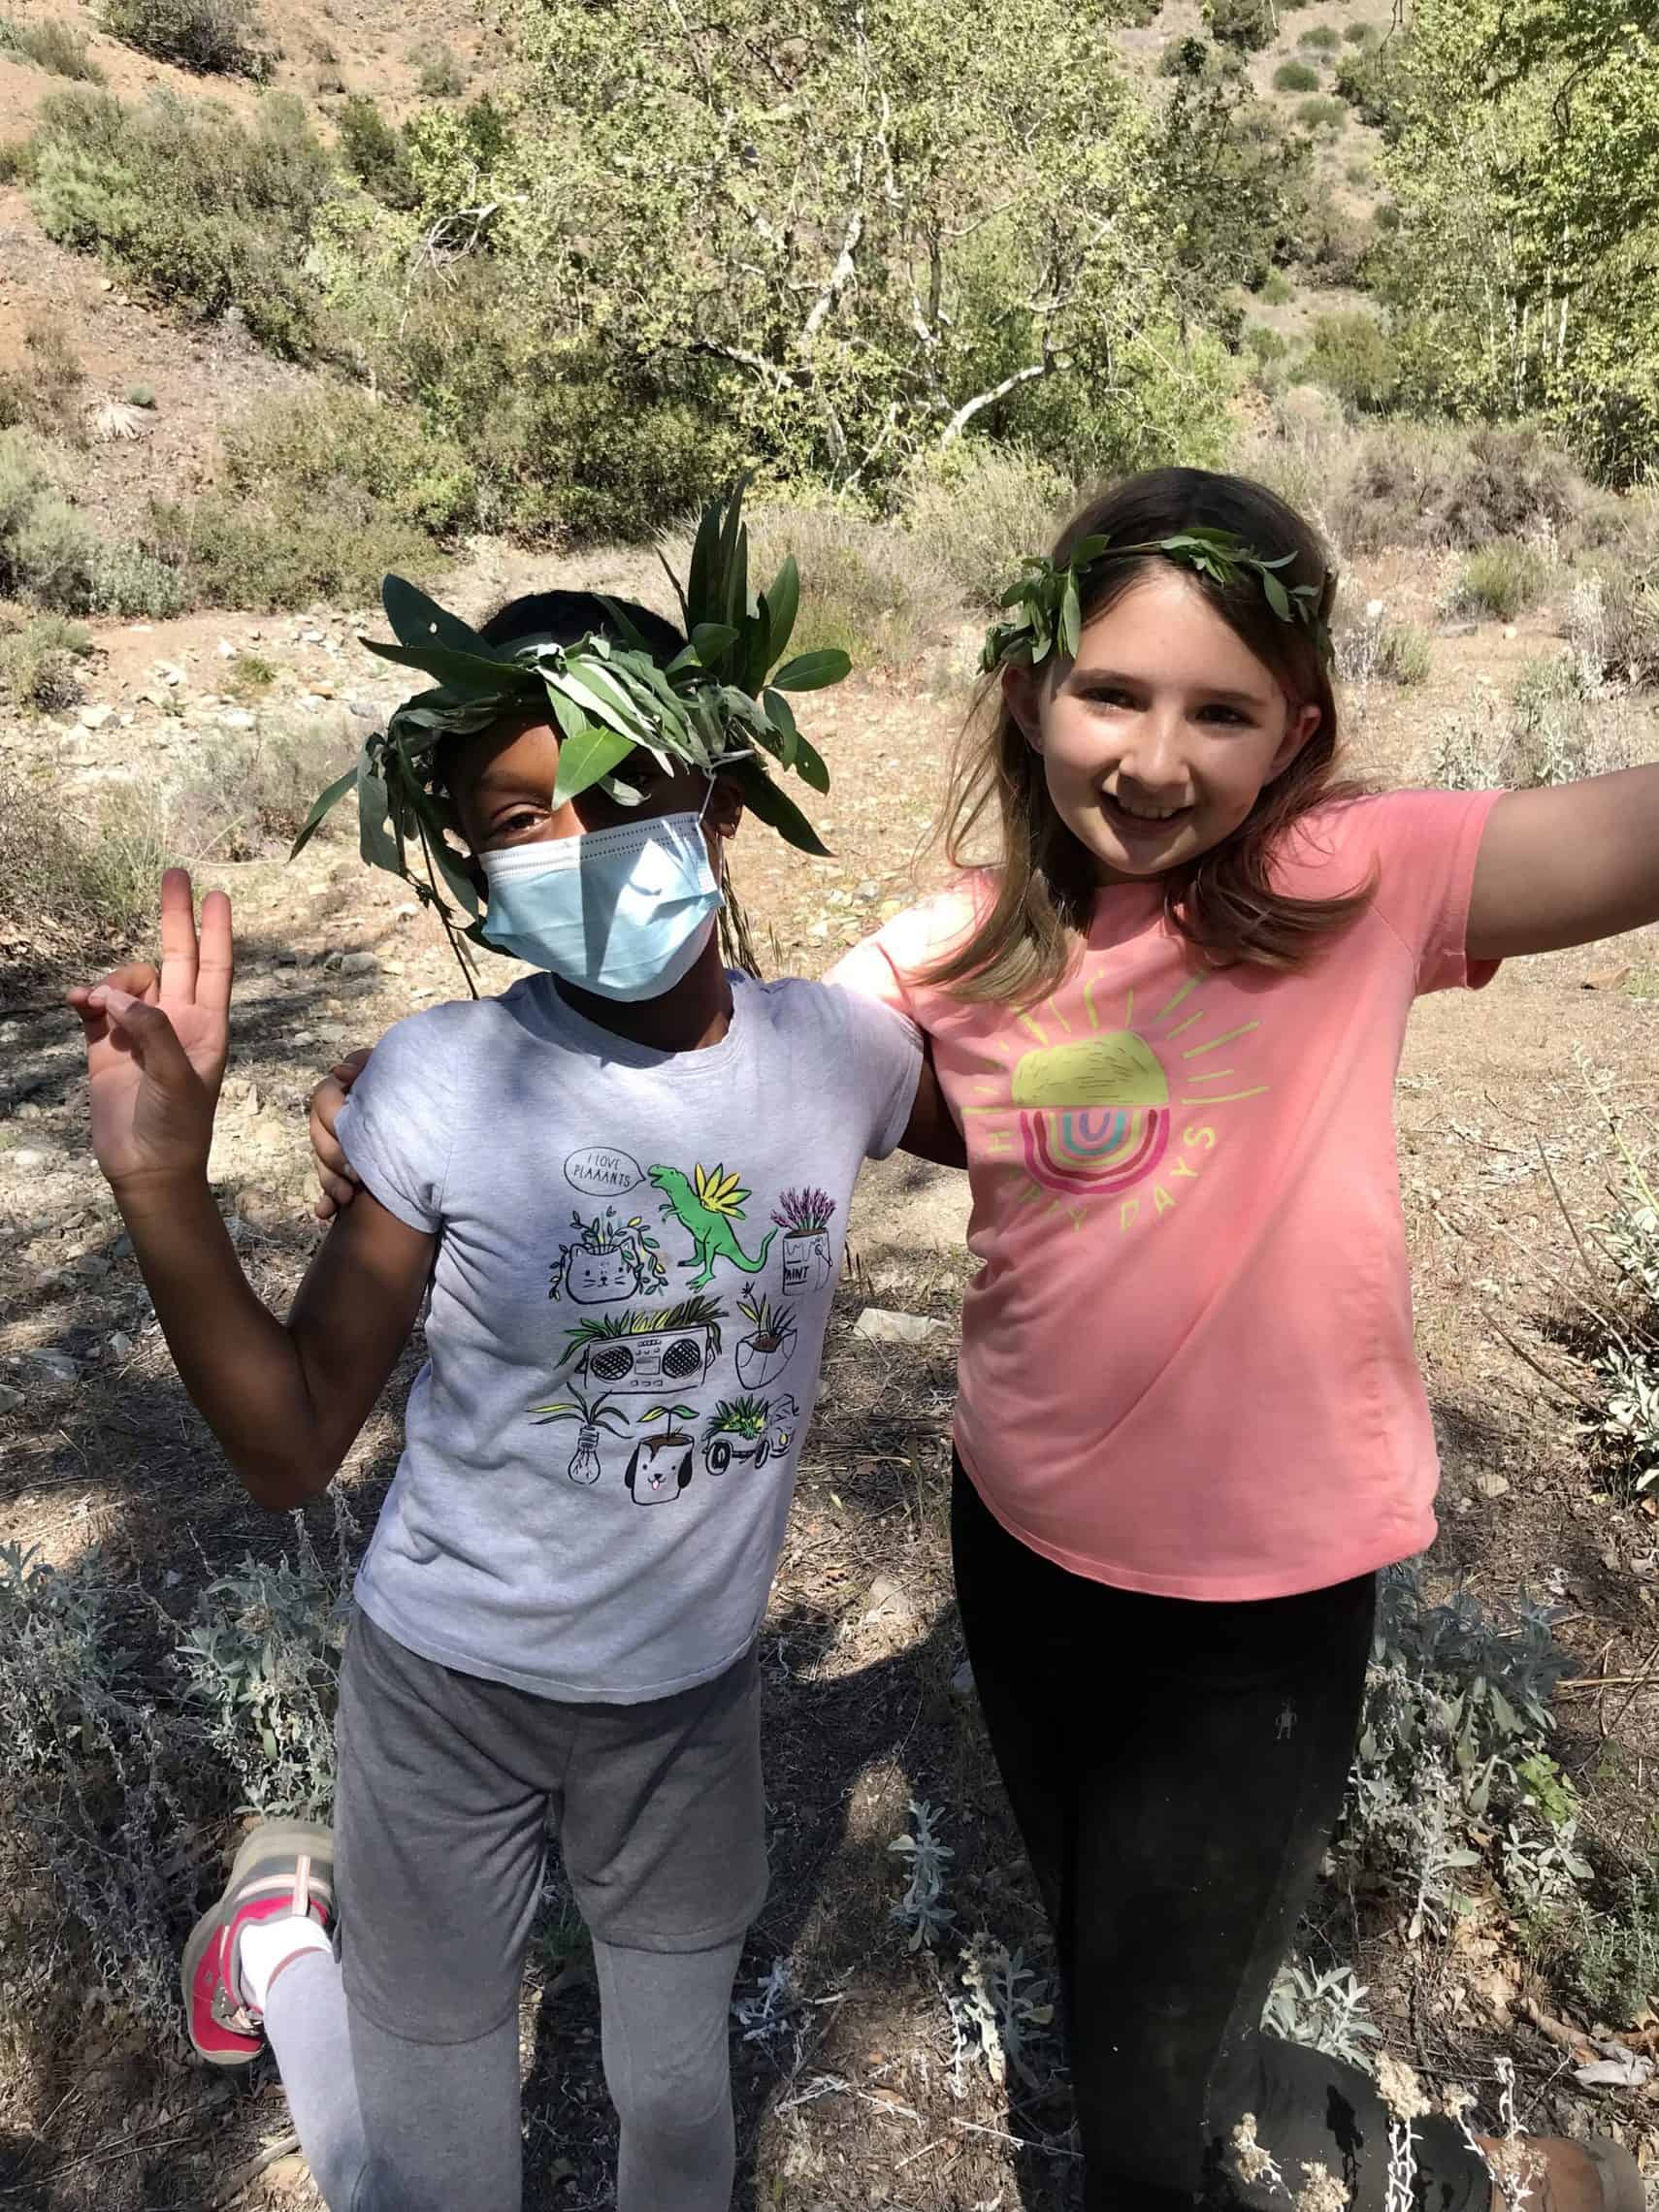 Homeschool Enrichment in Nature students with natural leaf crowns